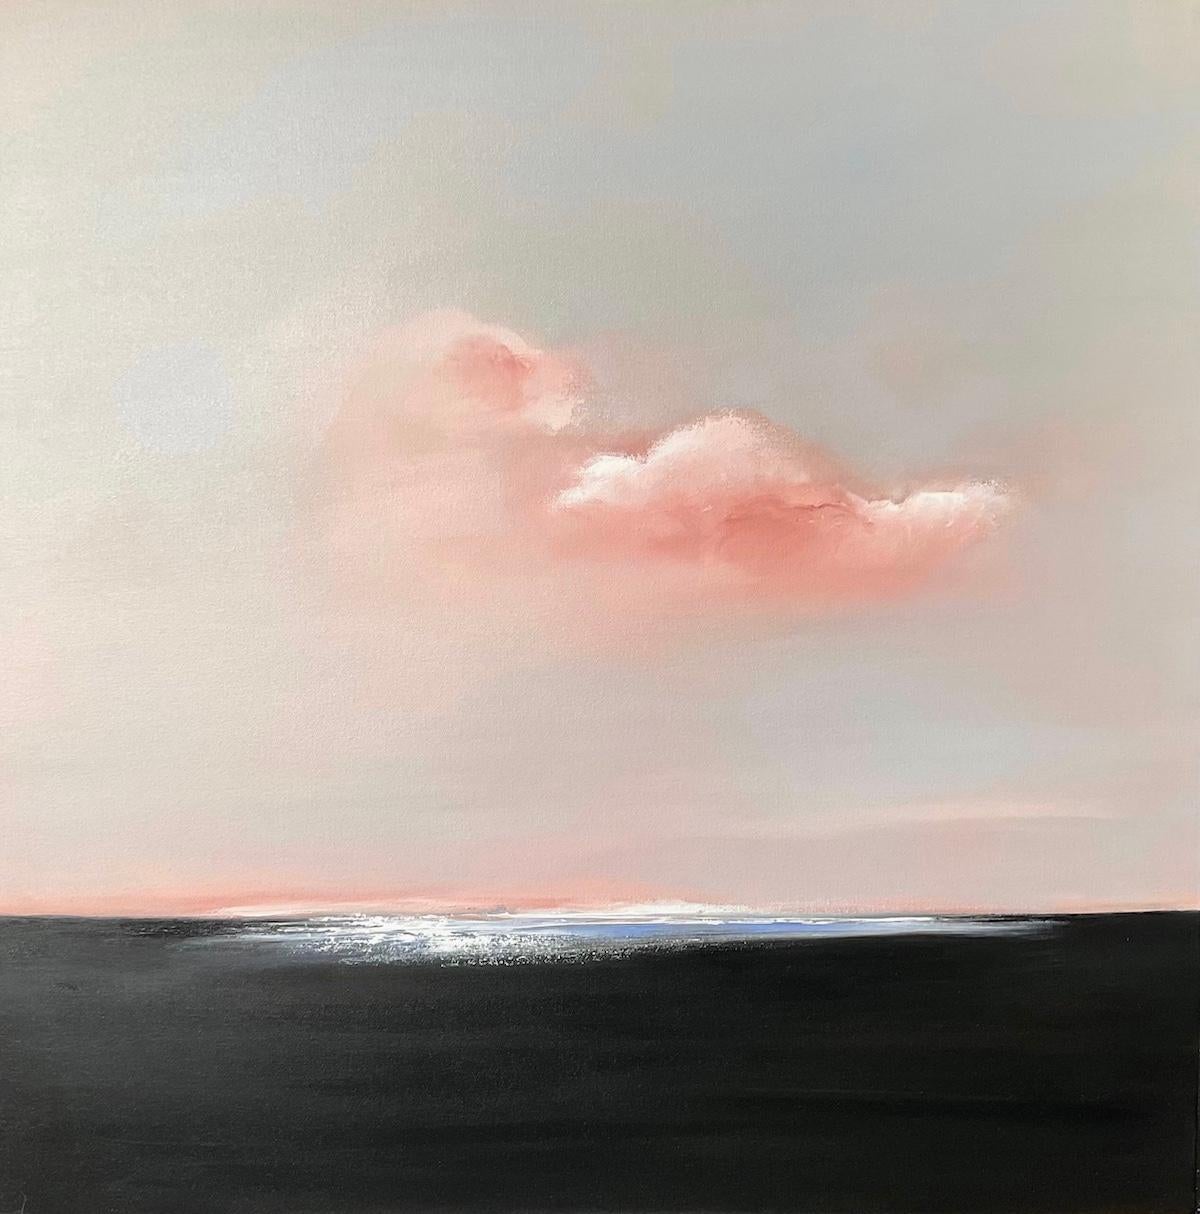 Nicola Mosley Figurative Painting - Contemplation, Atmospheric Contemporary Landscape art, Cloud and skyline art